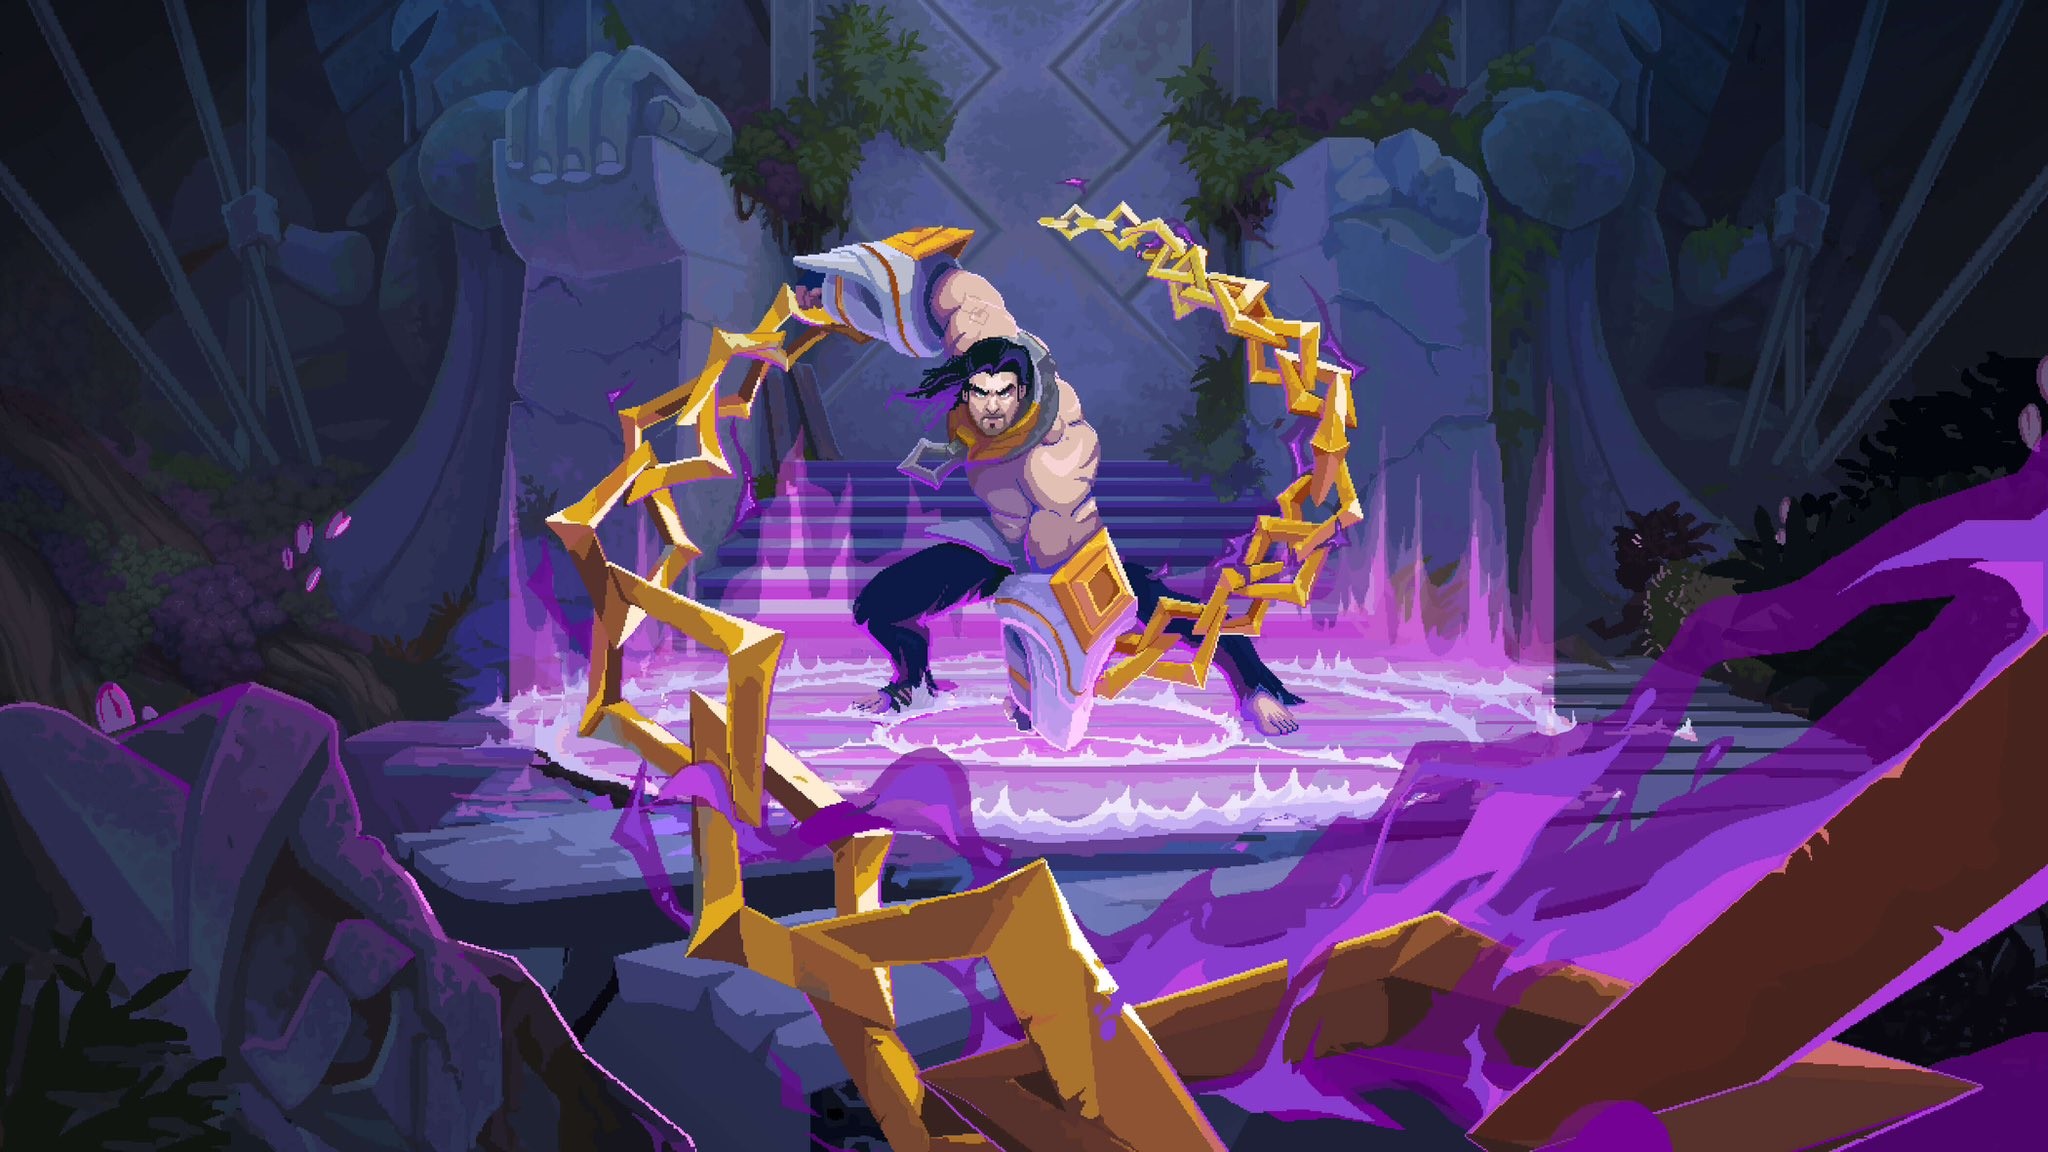 Sylas attacking with chains surrounded by purple magic